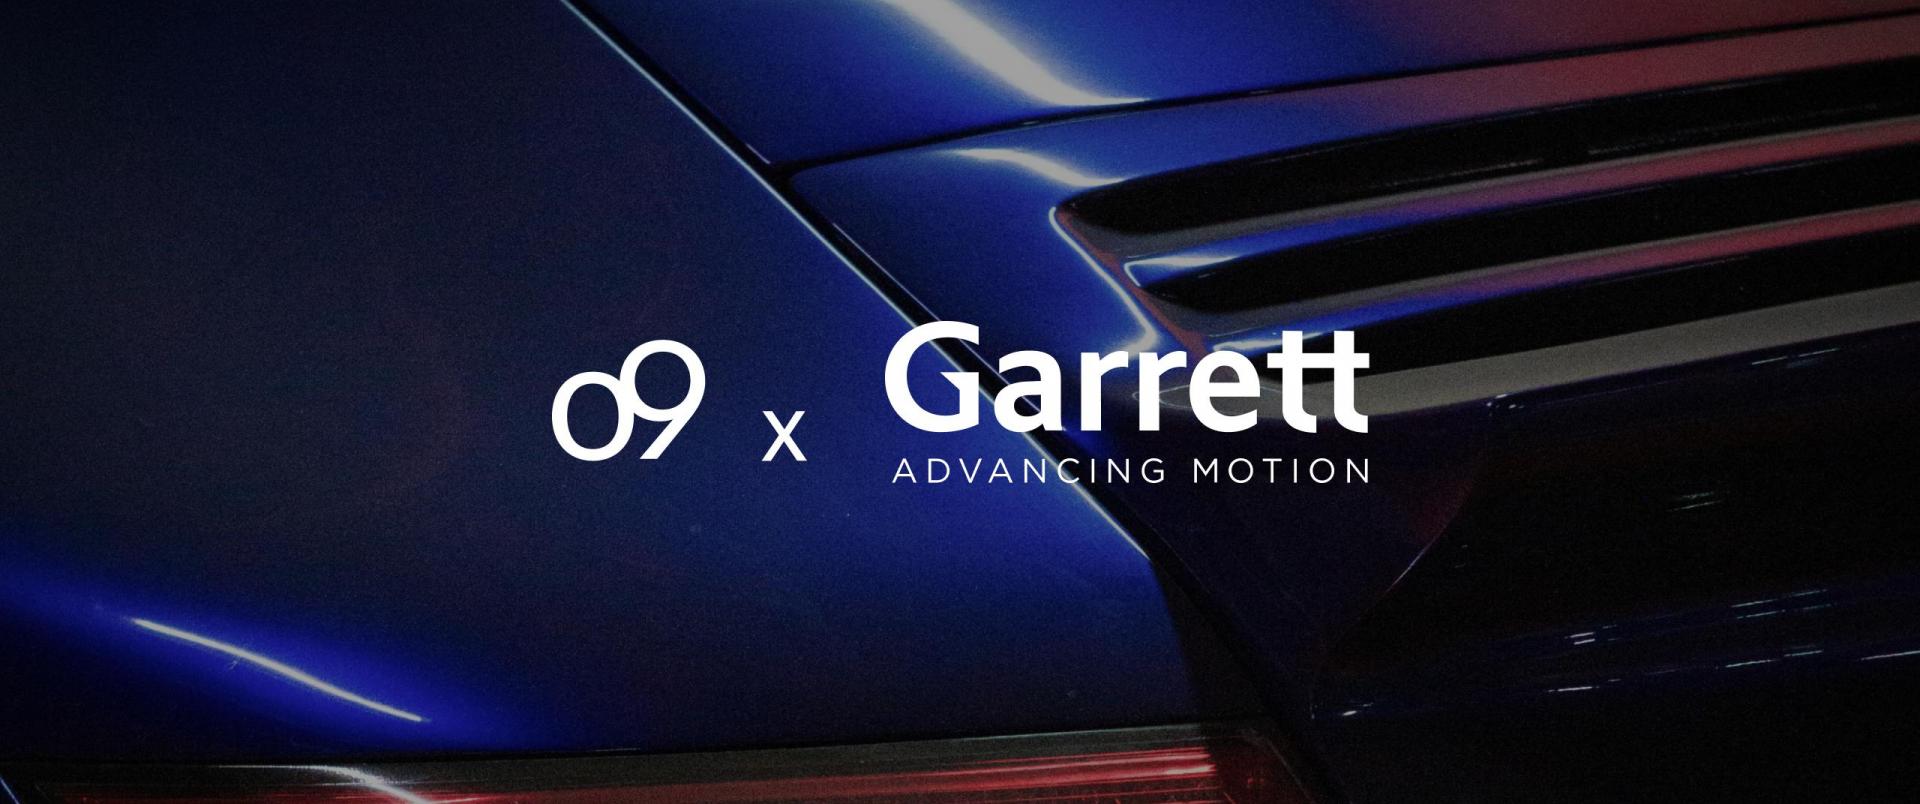 o9 Solutions Platform To Transform Garrett Motion’s End-To-End Supply Chain Planning Capabilities